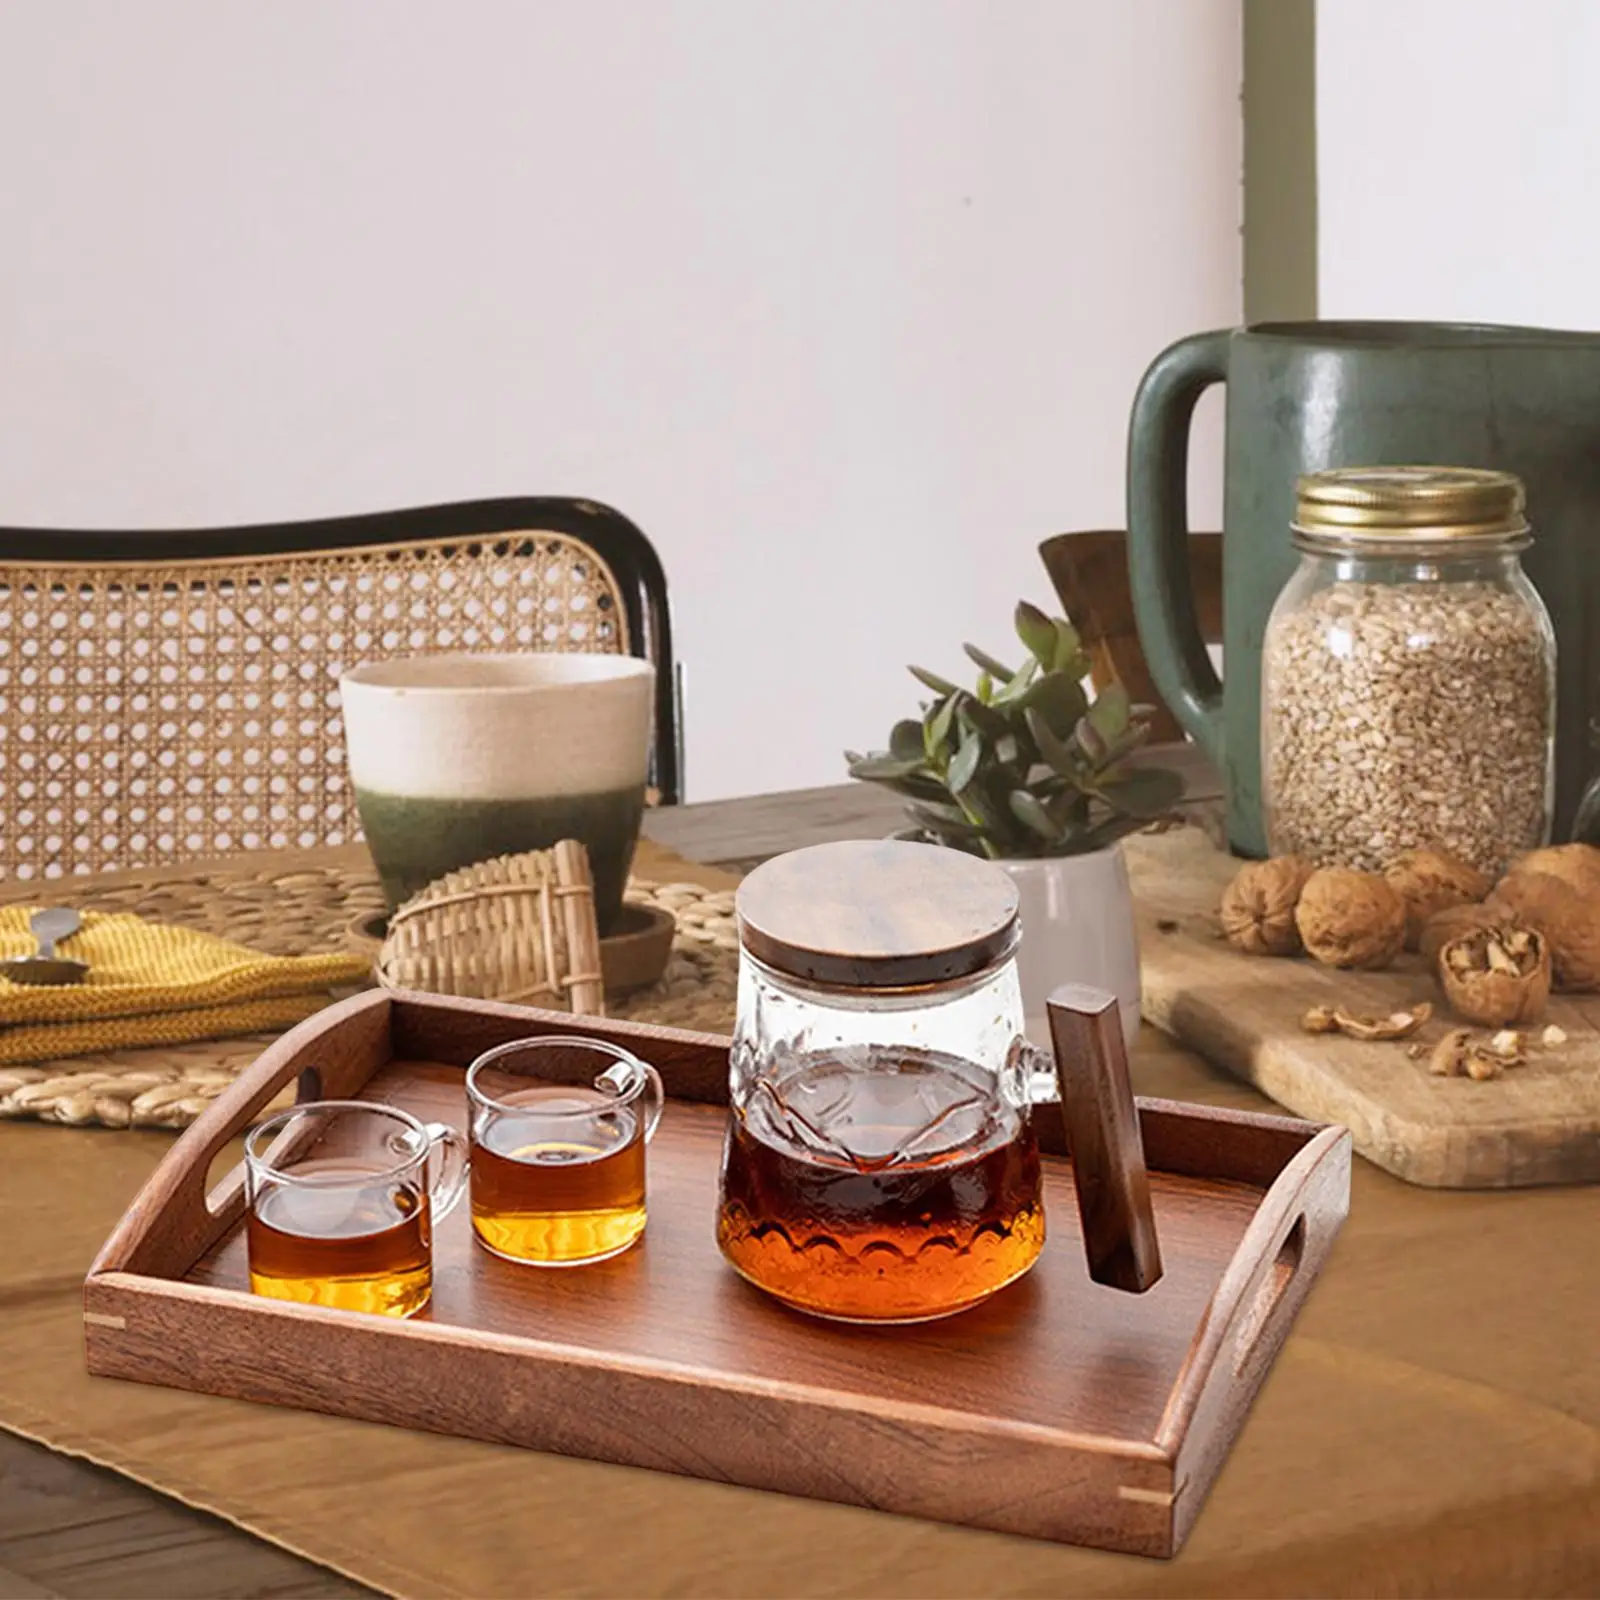 Serving Tray Works for Eating food Tray with Handles Wooden Serving Decorative Tray for Restaurants Living Room tea trays